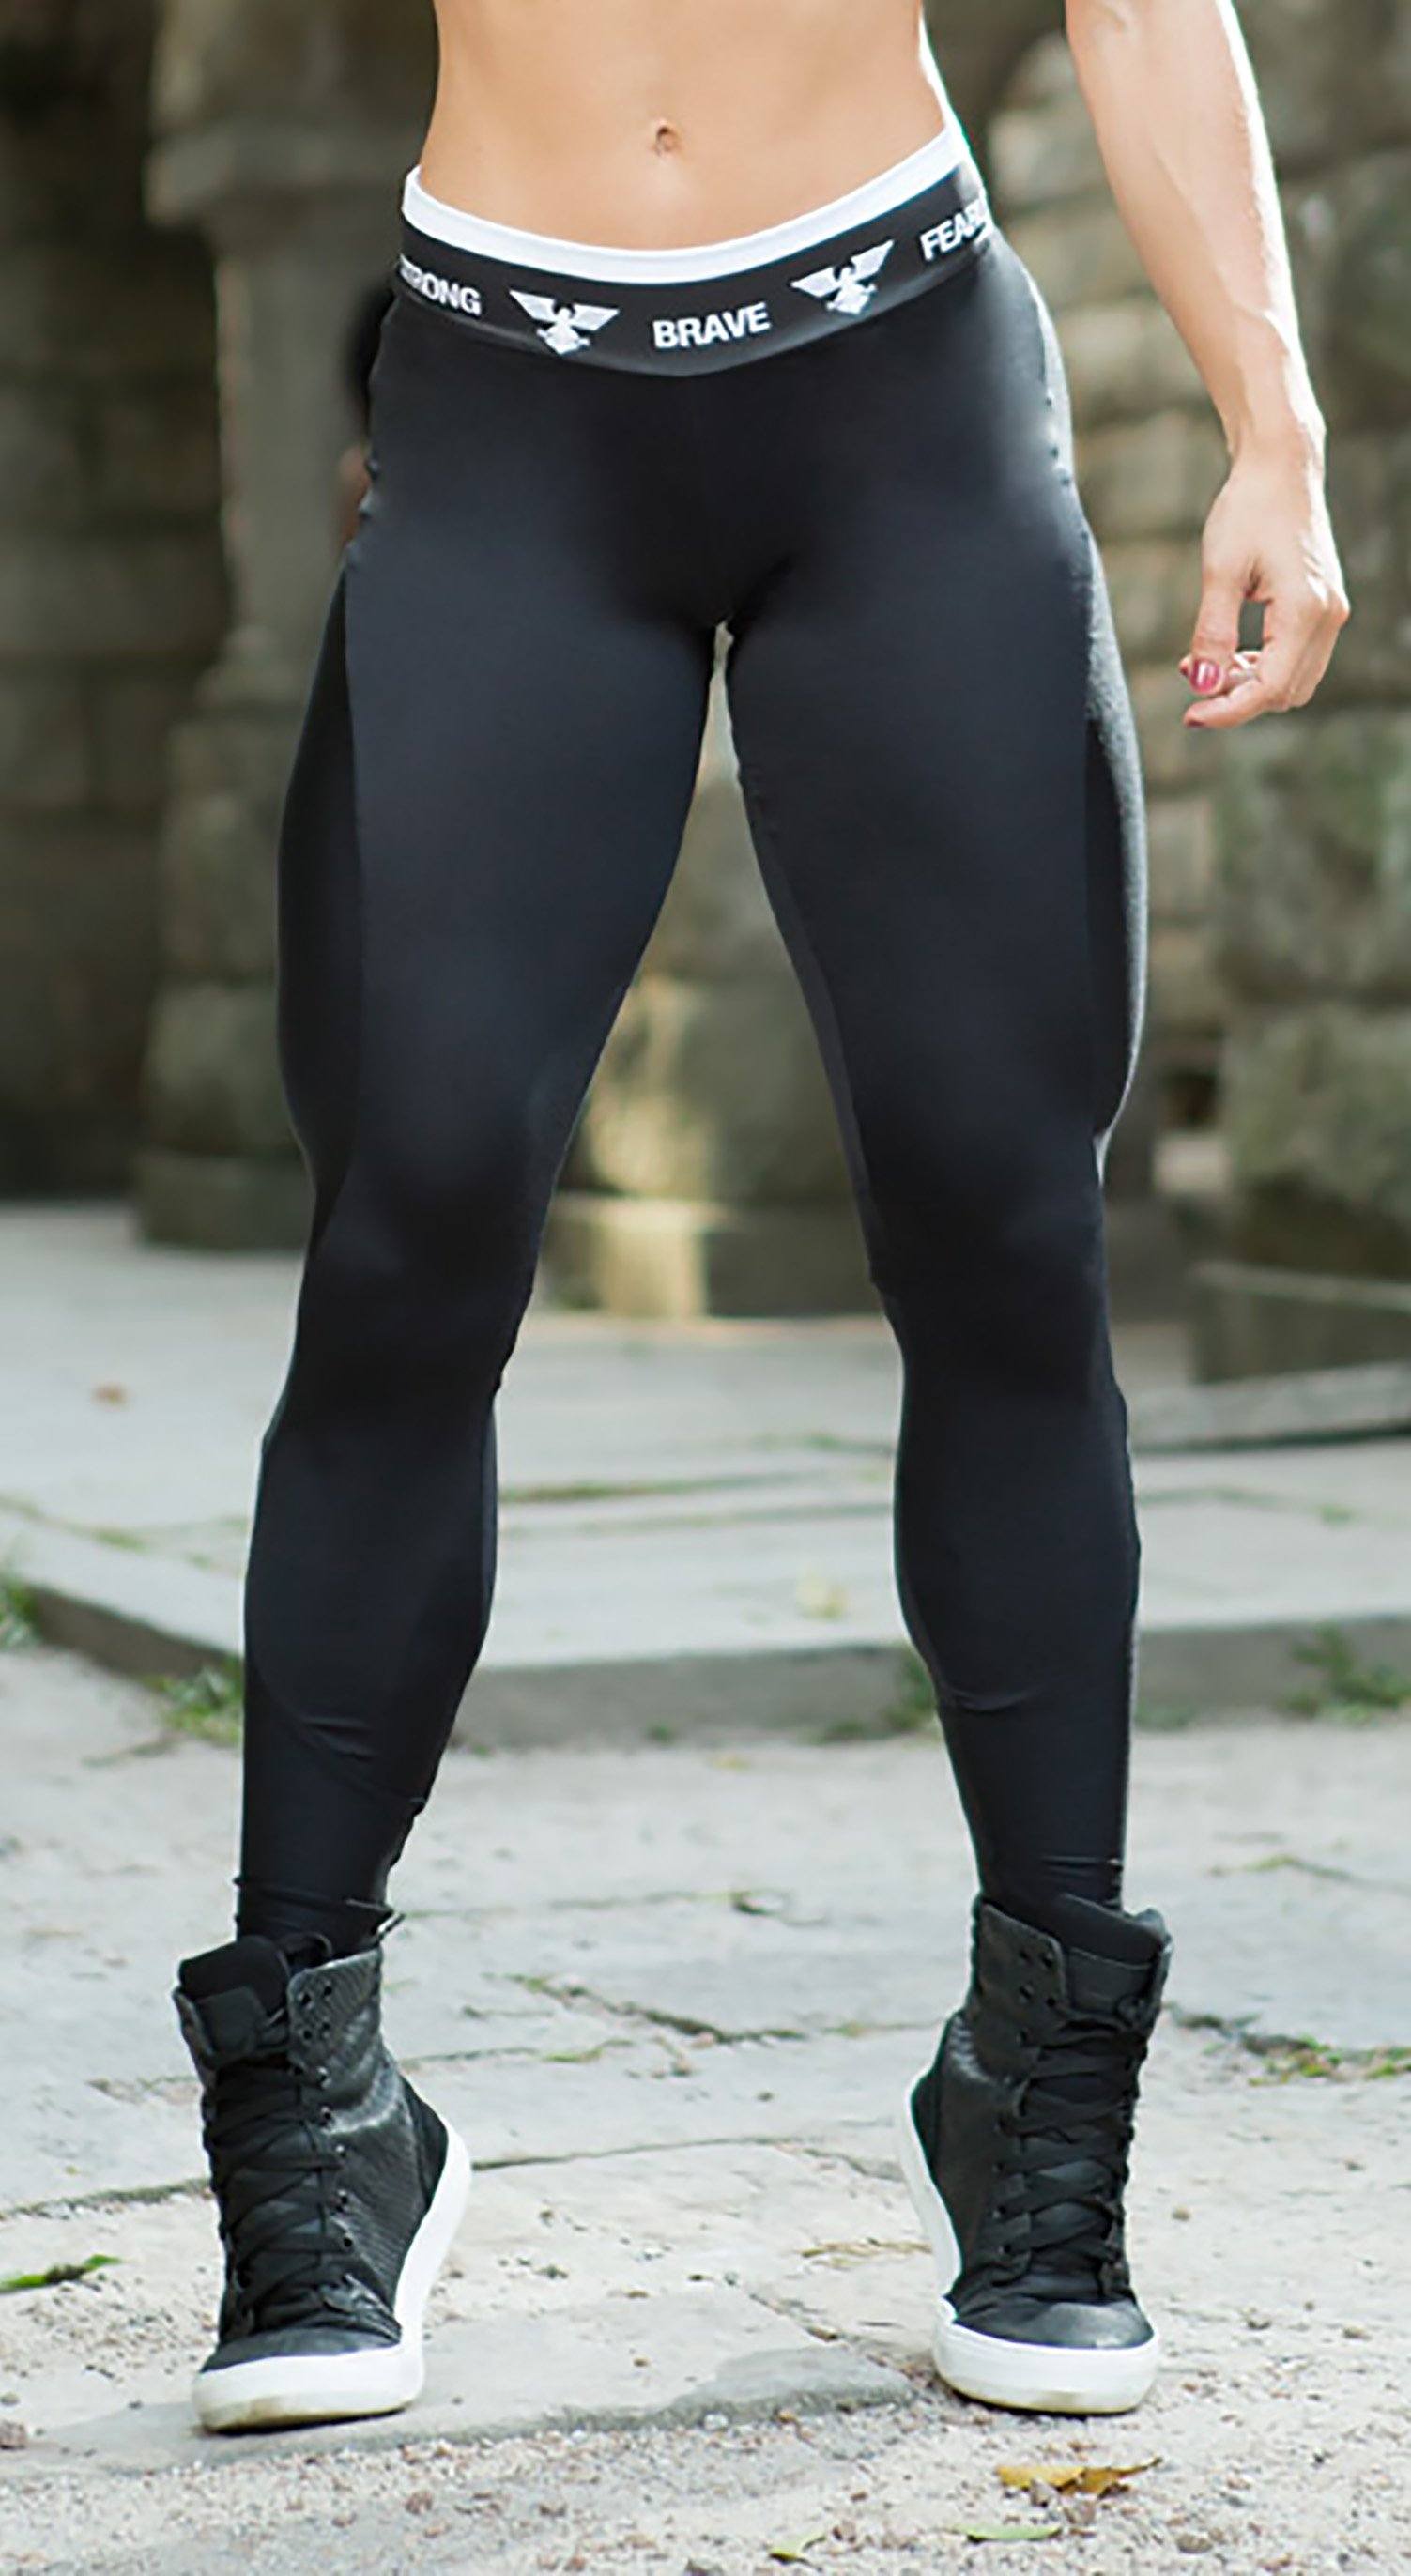 Stretchy Scrunch Butt Seamless Gym Leggings For Women Push Up Booty Workout  Gym Tights For Fitness, Yoga, And Amplification 220914 From Kong01, $12.71  | DHgate.Com